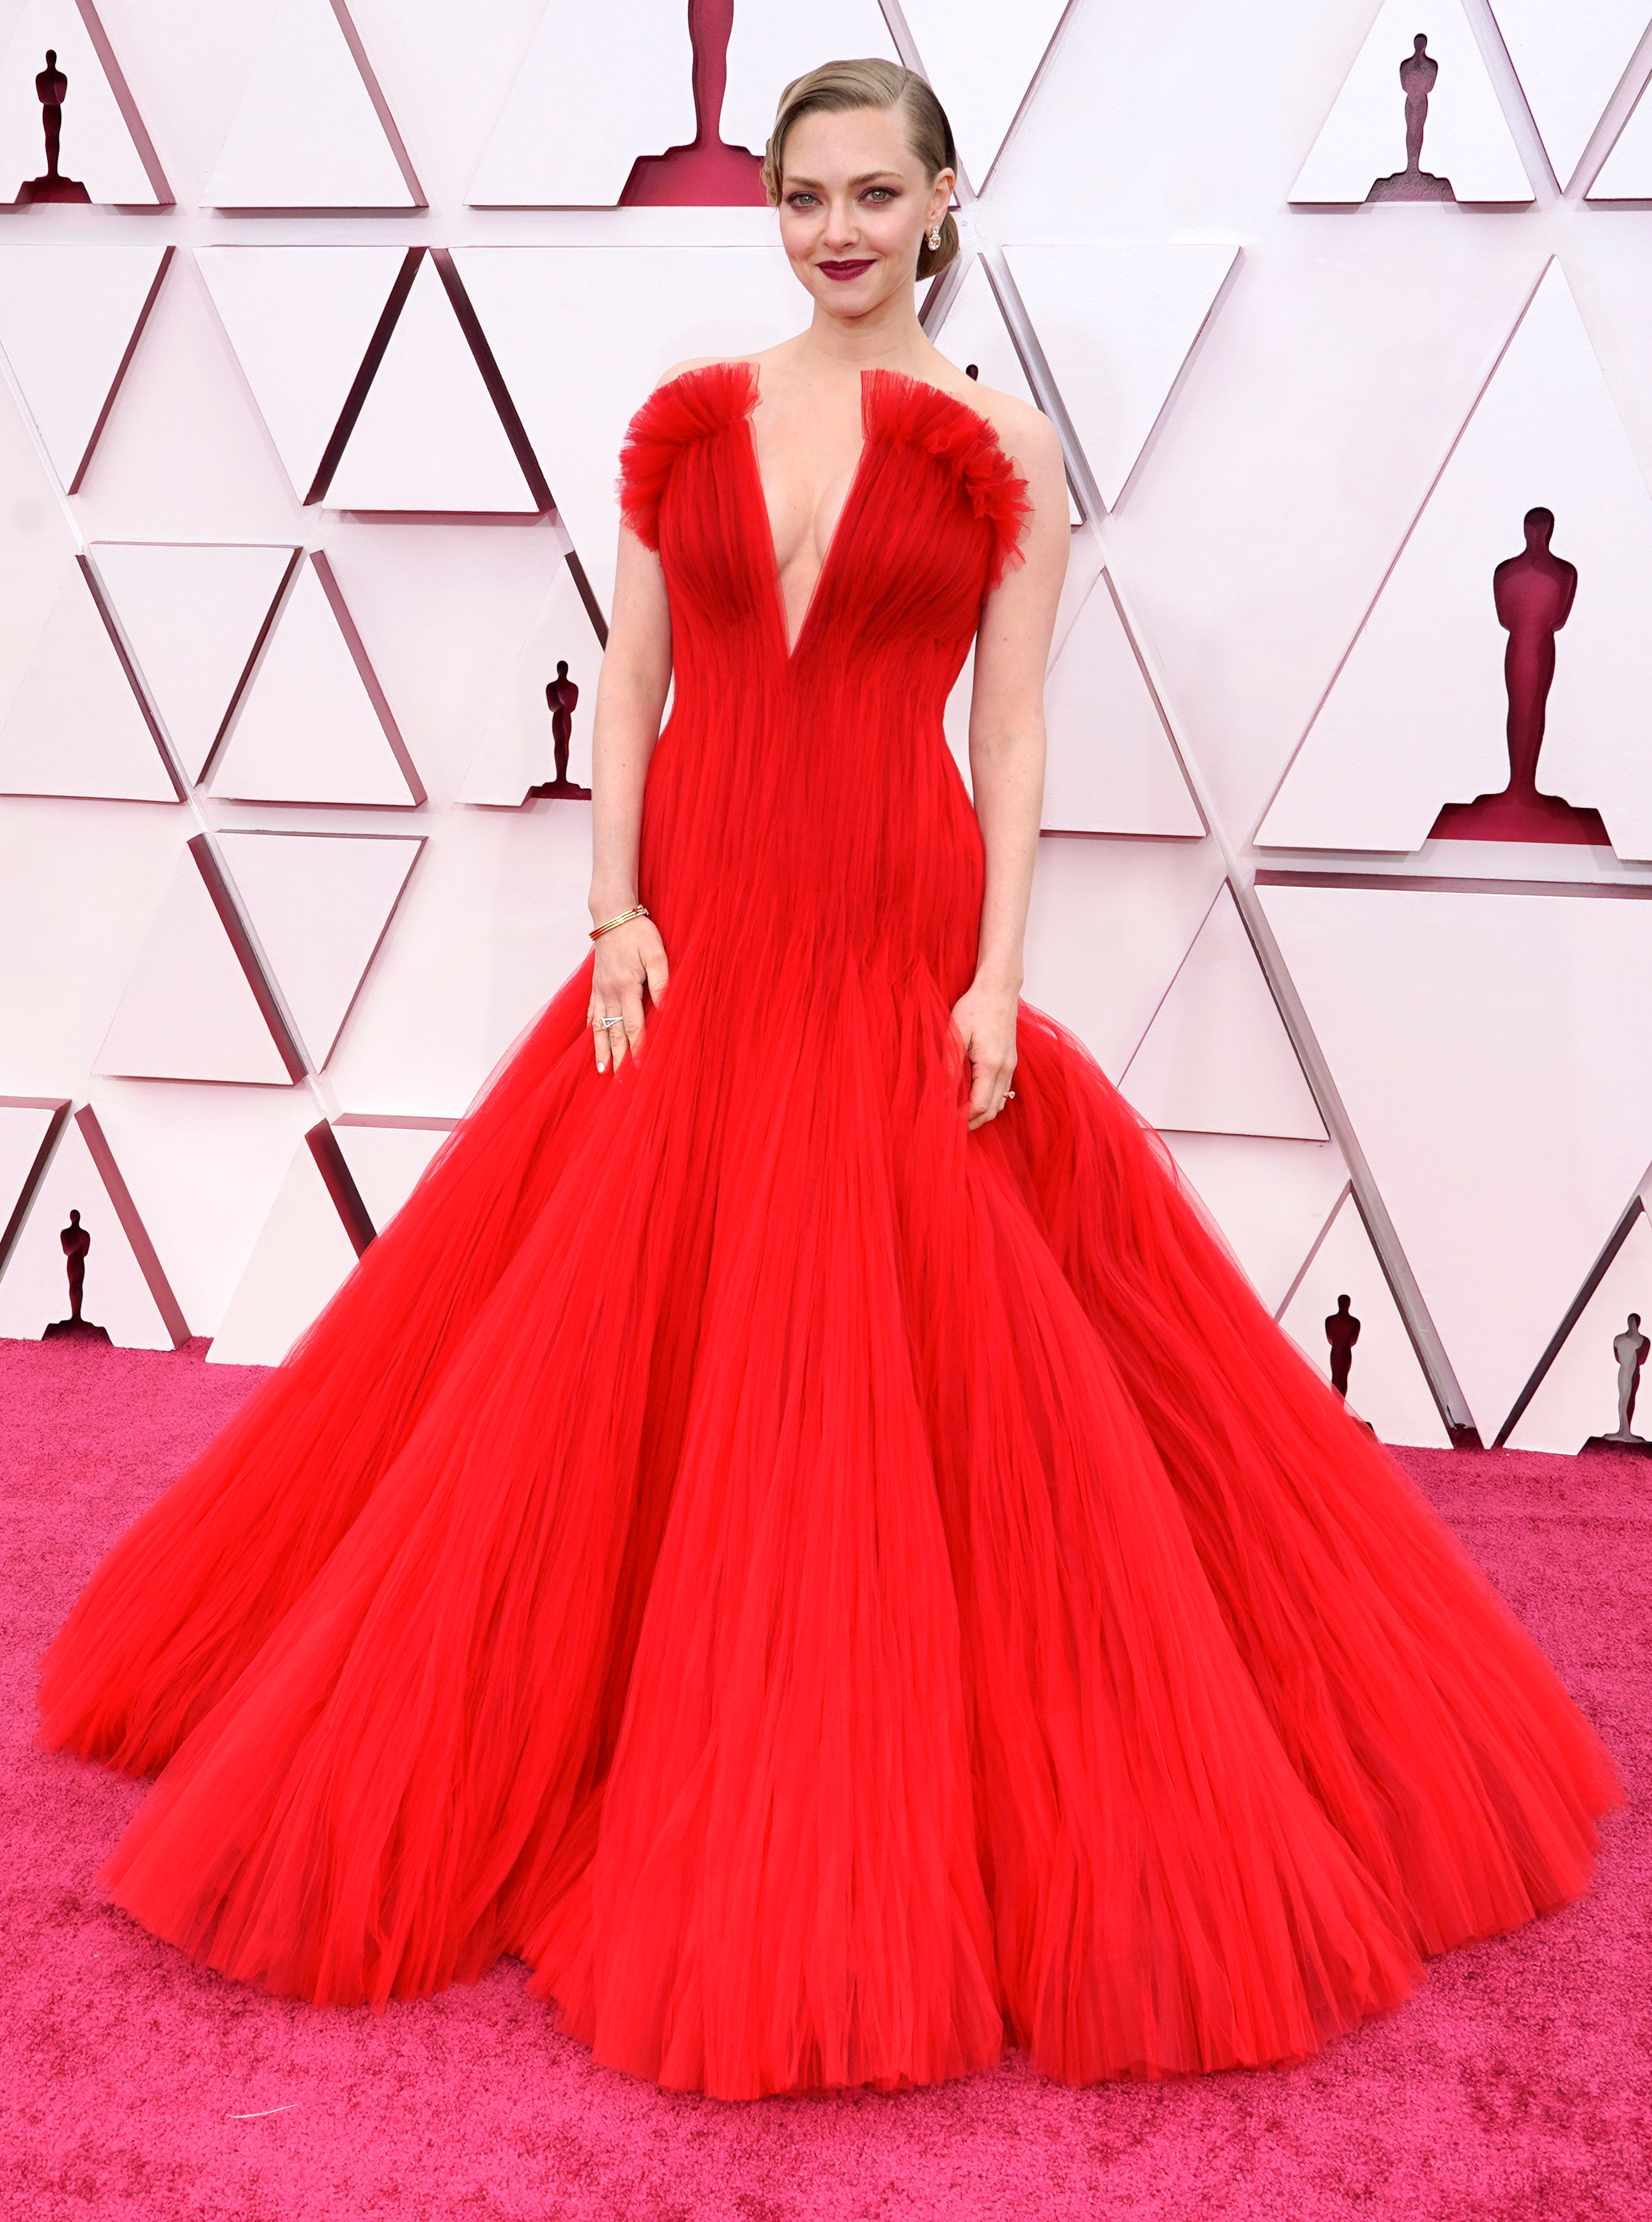 Oscars 2021 Red Carpet Photos See Zendaya and More Stars' Looks